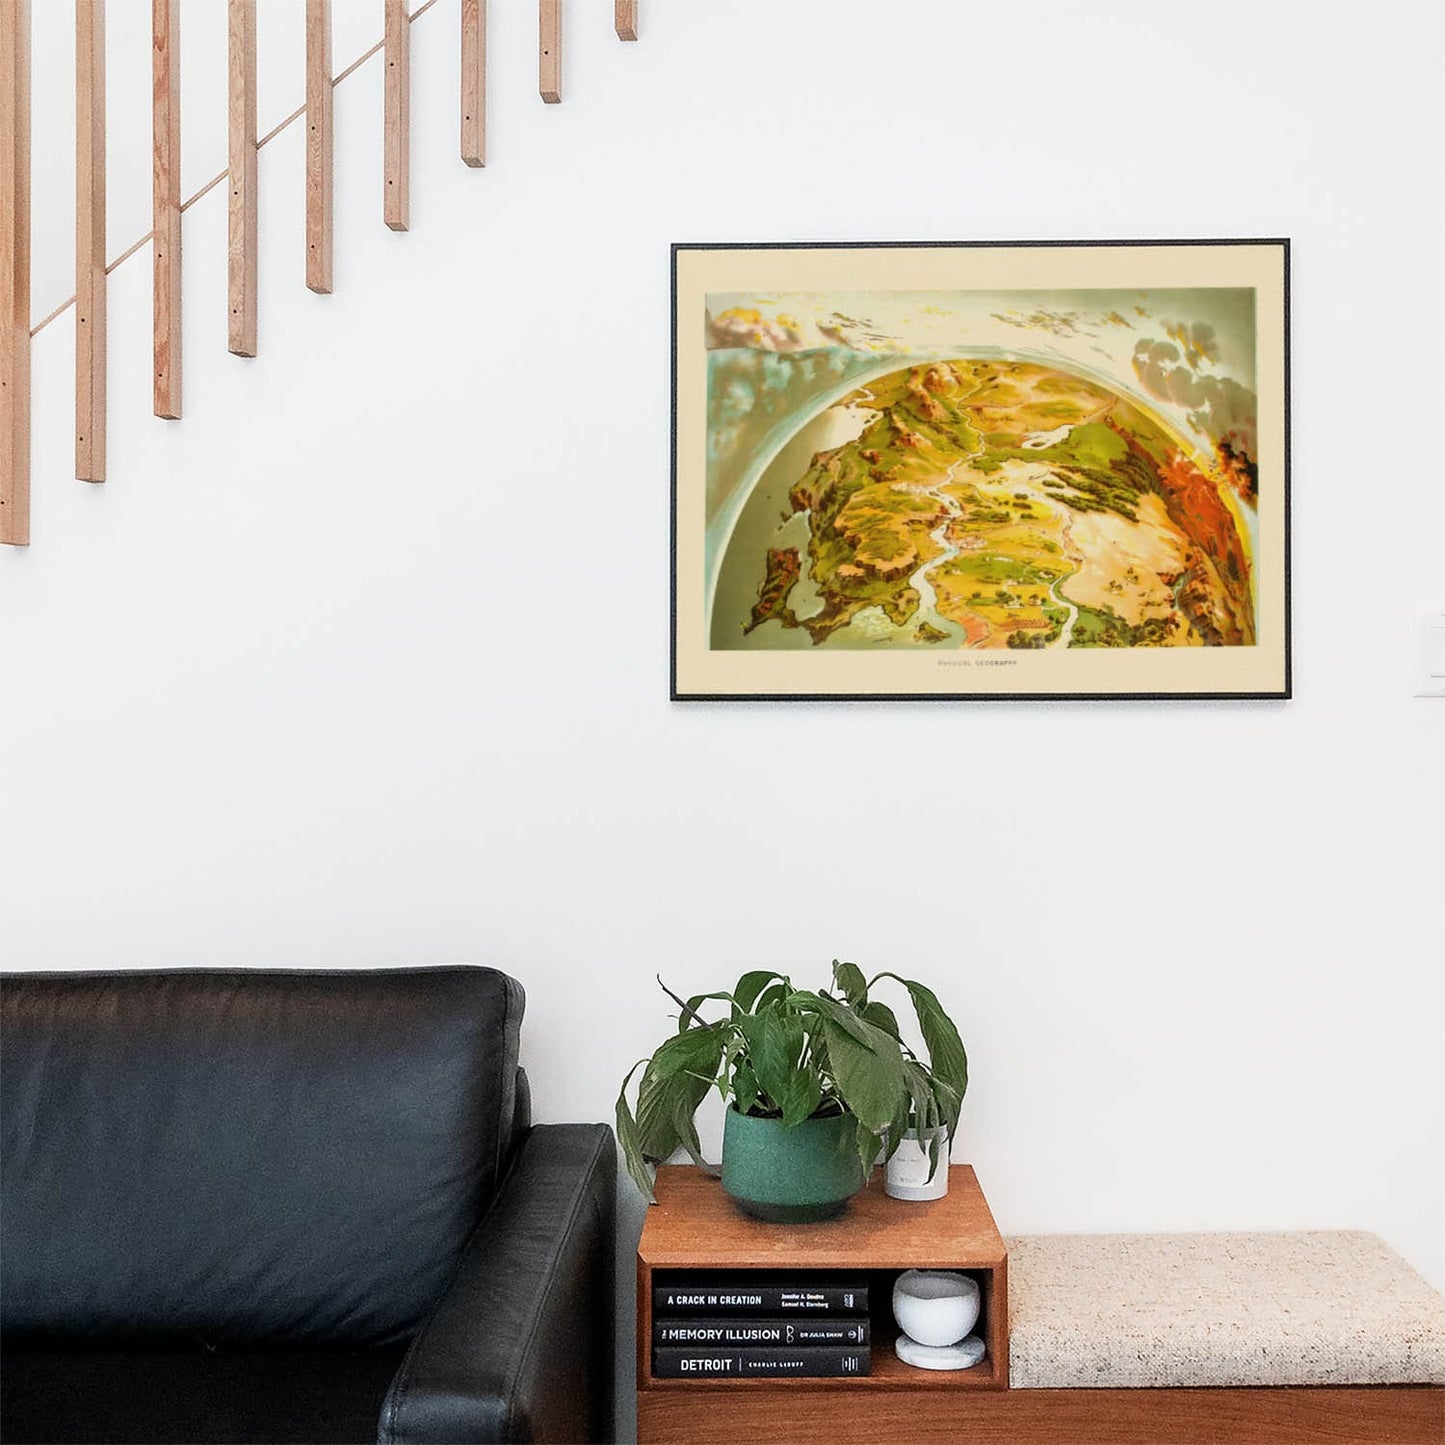 Pictorial of Earth Wall Art Print in a Picture Frame on Living Room Wall